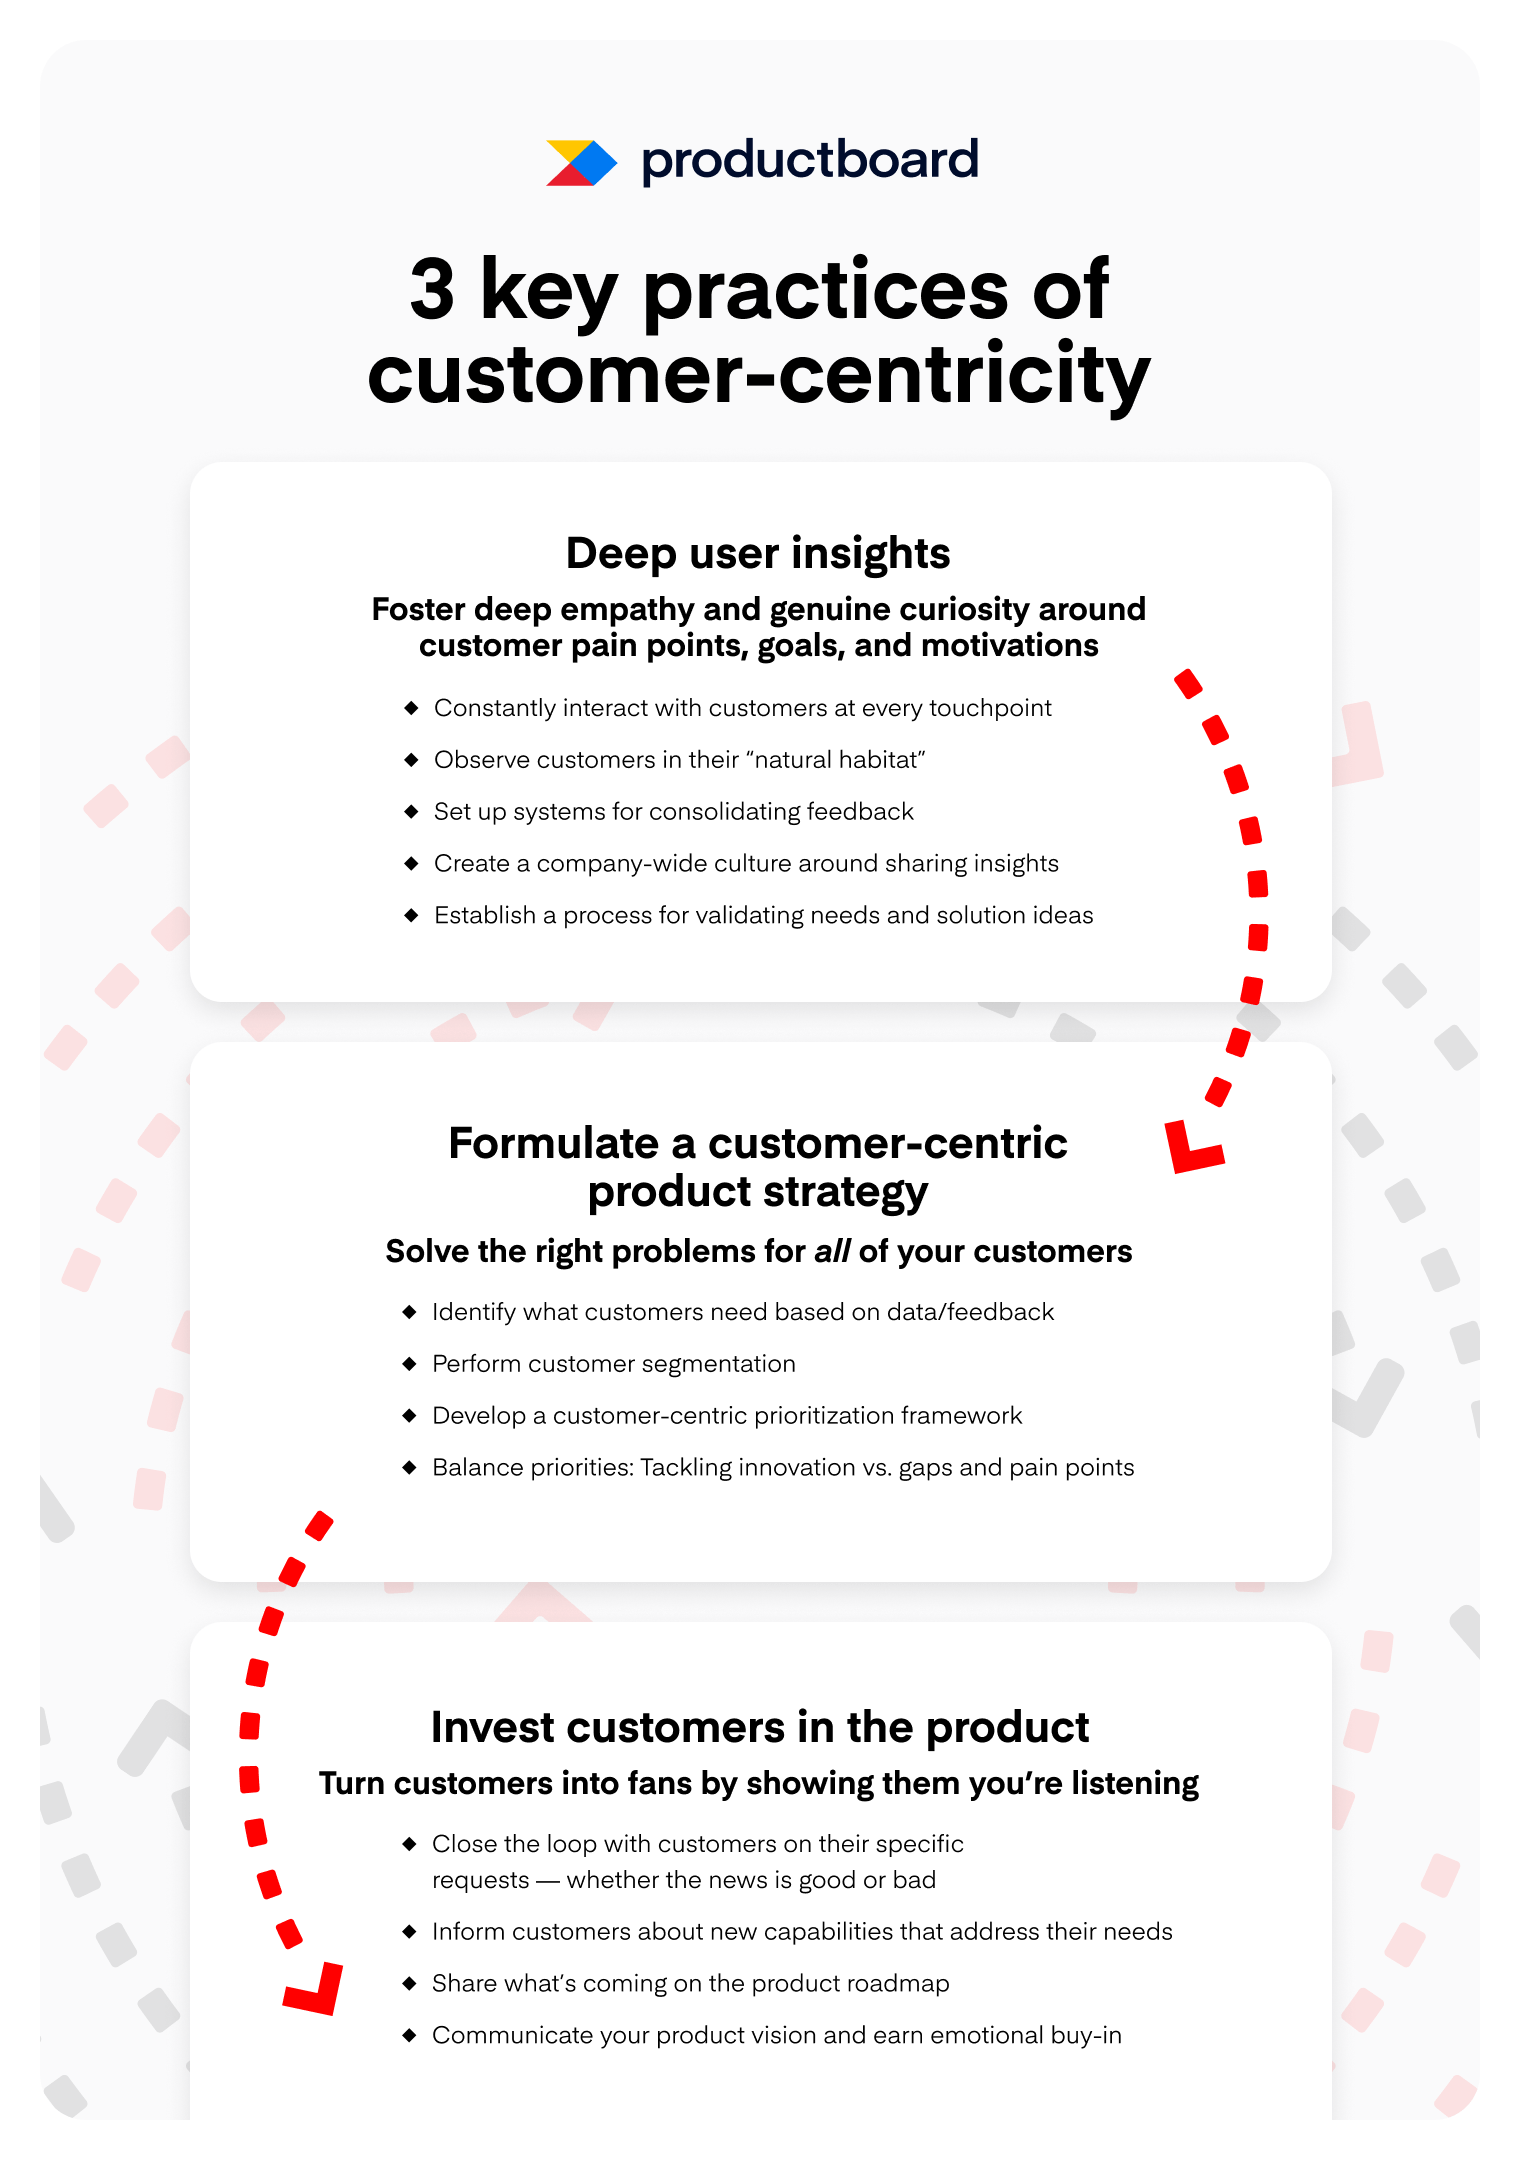 customer-centricity product management key practices infographic